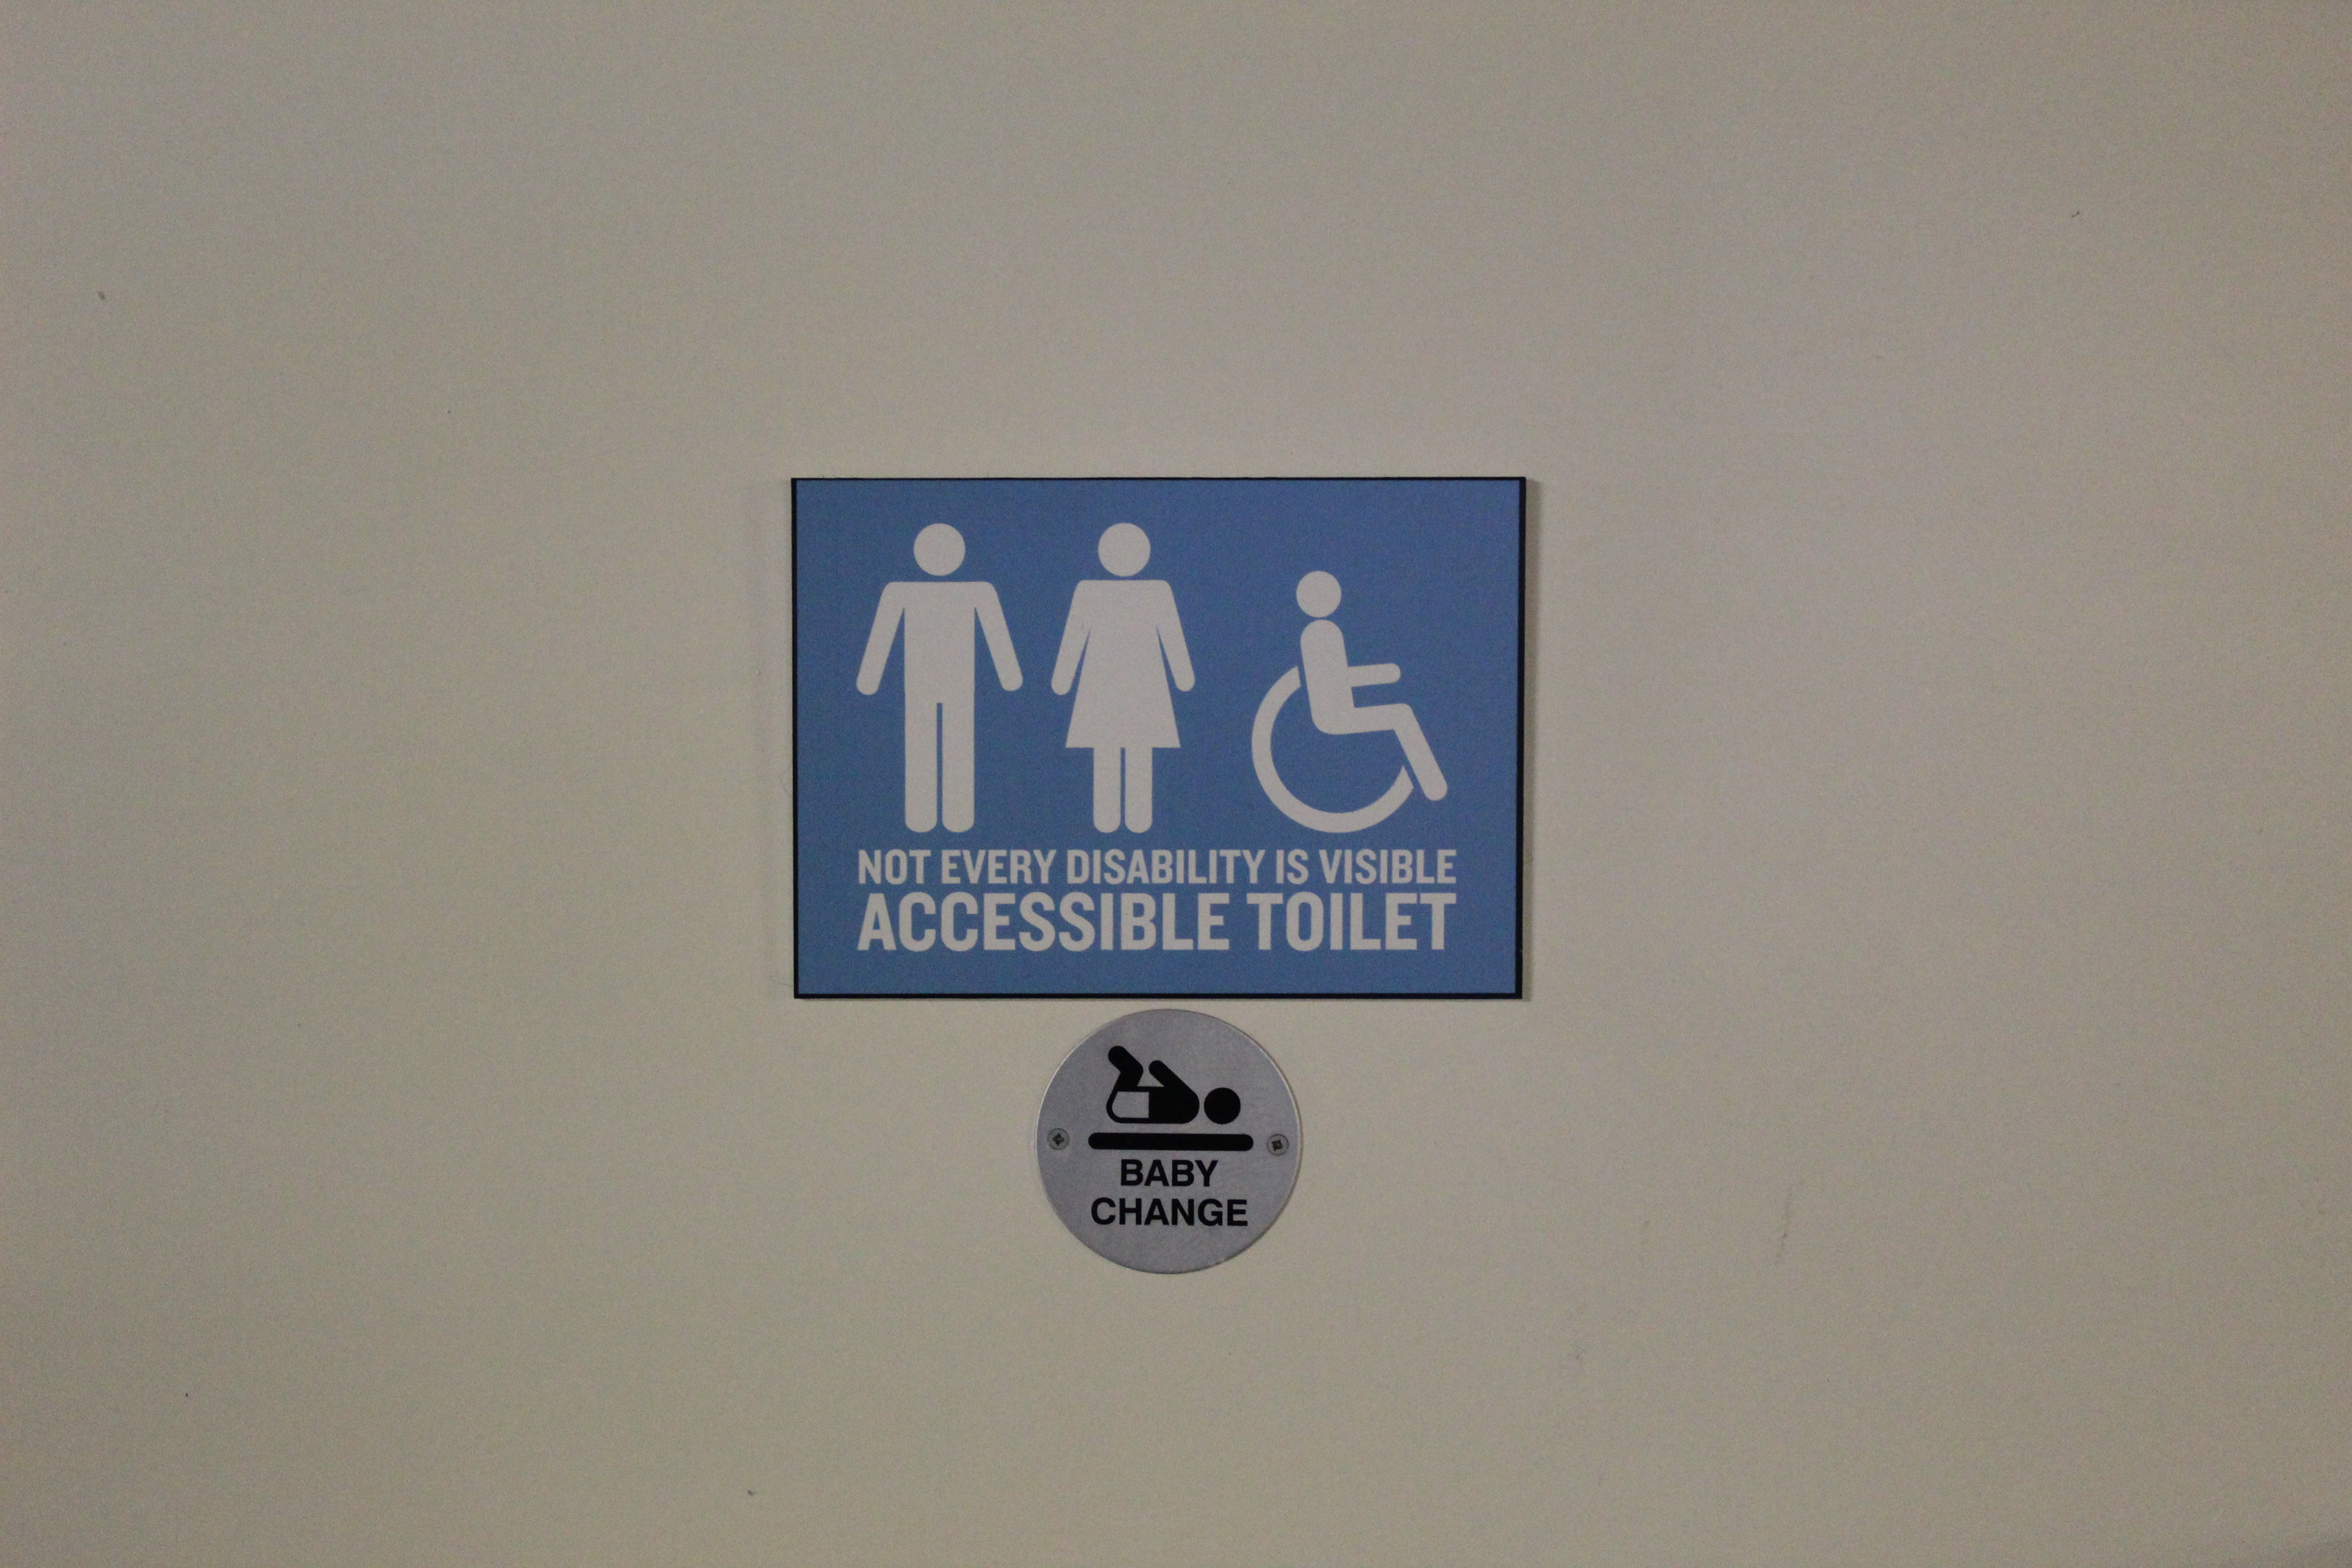 New disabled toilet signage